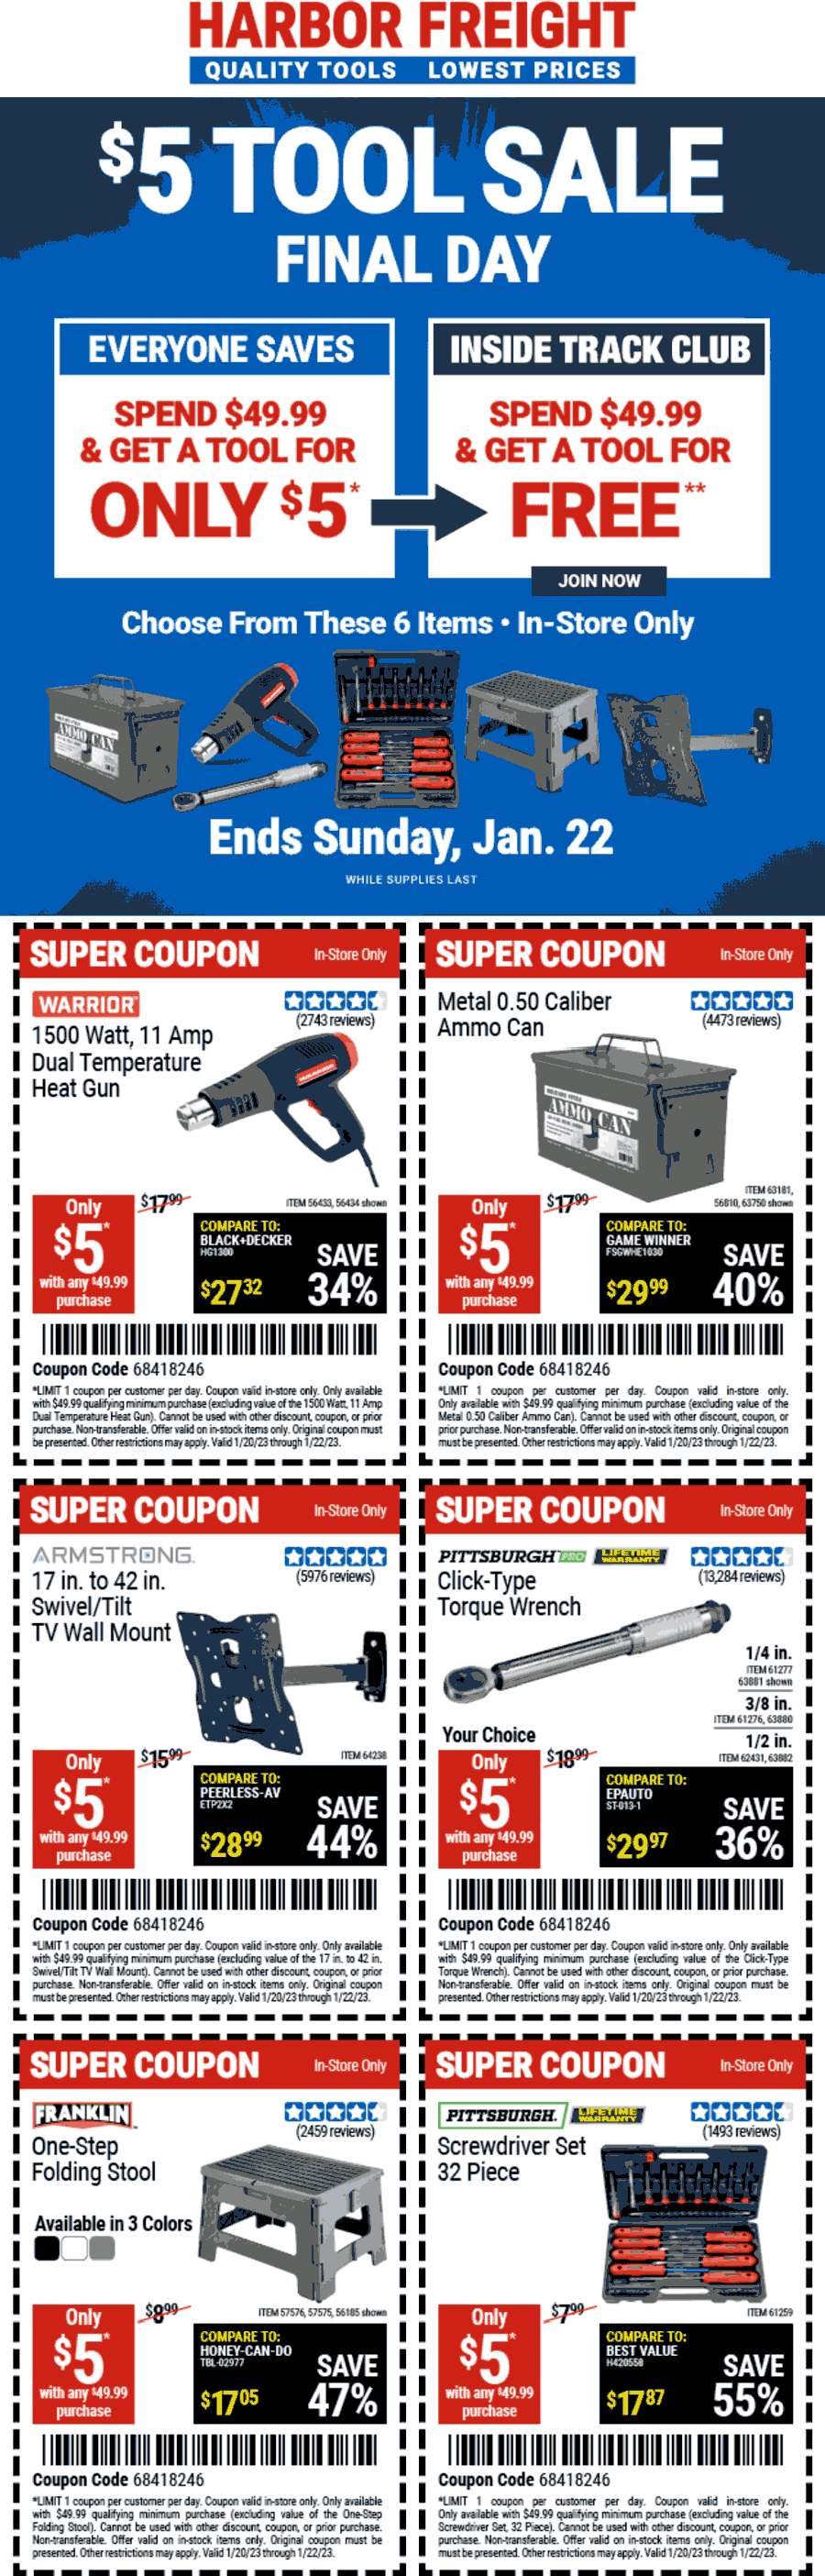 Harbor Freight stores Coupon  Various $5 tools today at Harbor Freight Tools #harborfreight 